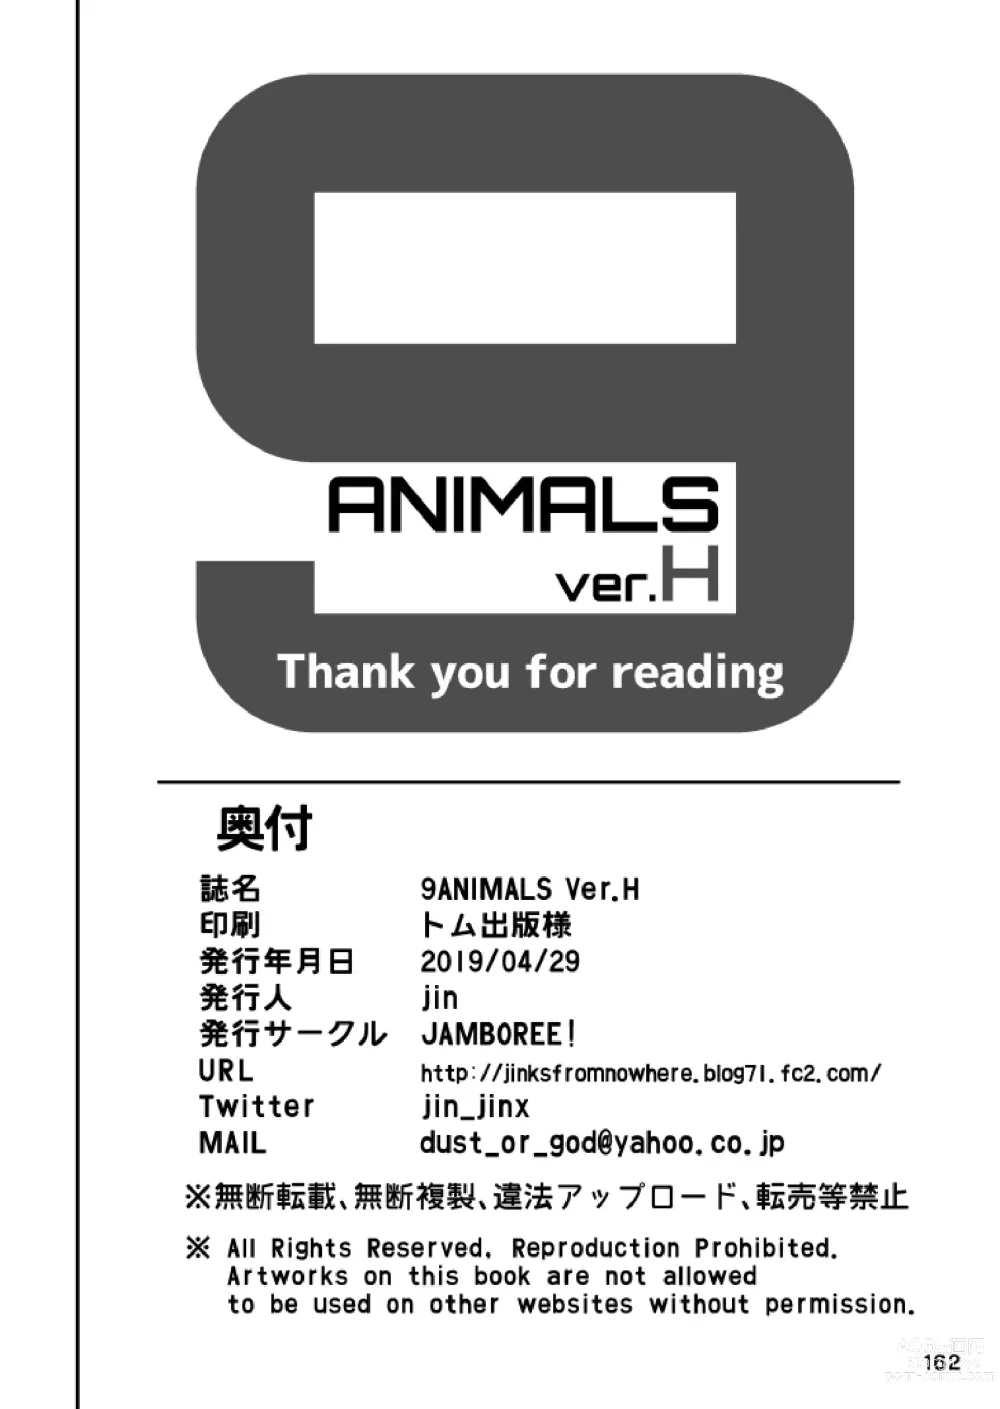 Page 138 of doujinshi 9ANIMALS ver.H